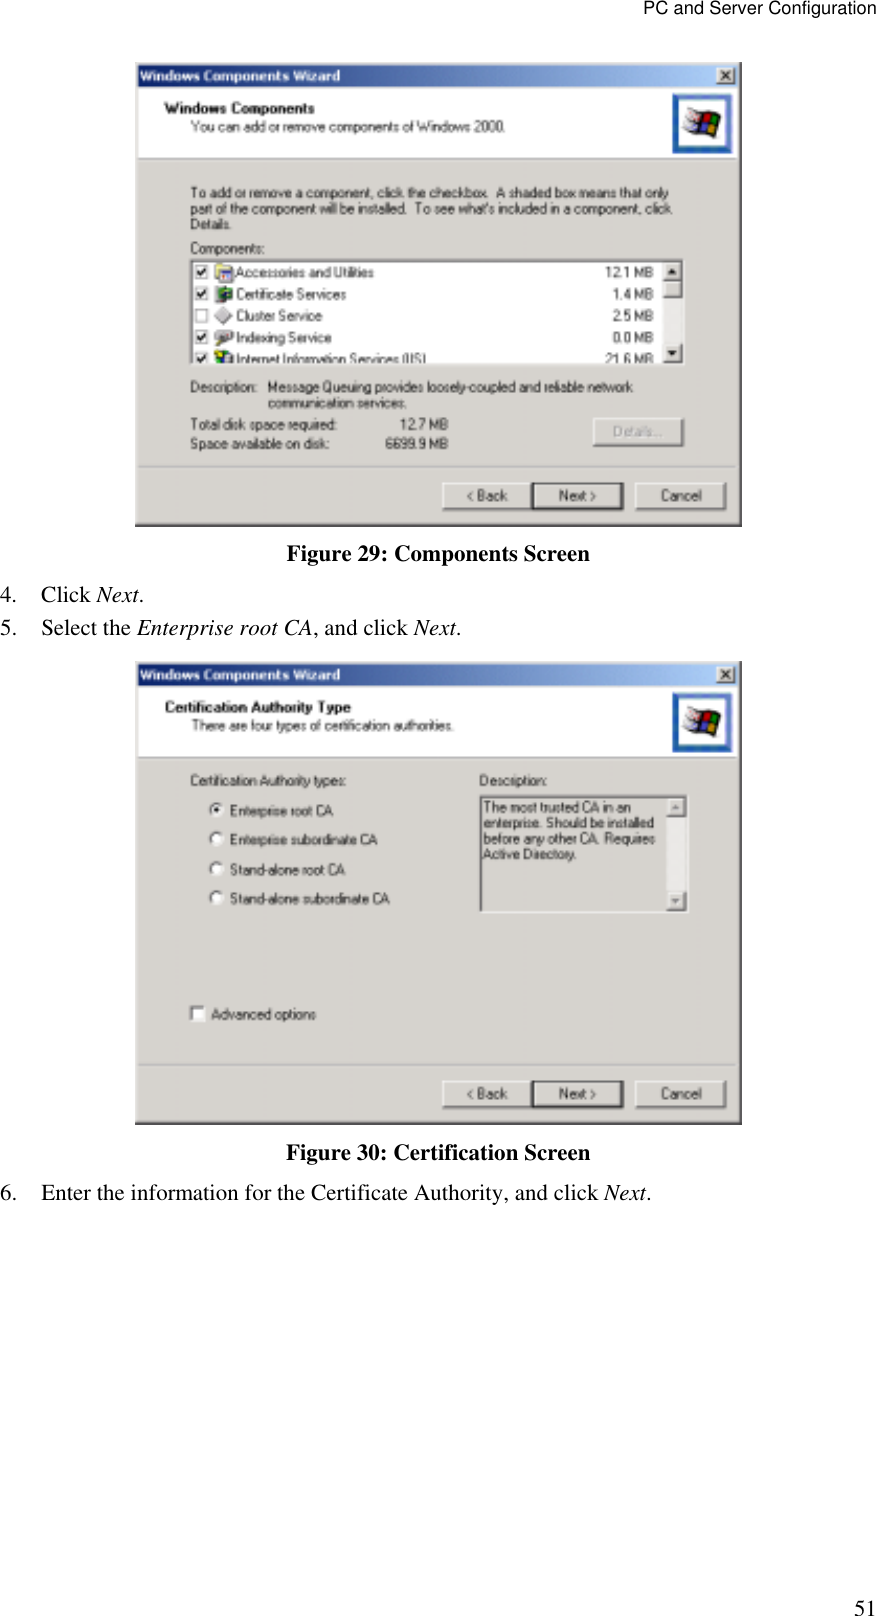 PC and Server Configuration 51  Figure 29: Components Screen 4. Click Next. 5. Select the Enterprise root CA, and click Next.  Figure 30: Certification Screen 6.  Enter the information for the Certificate Authority, and click Next.  